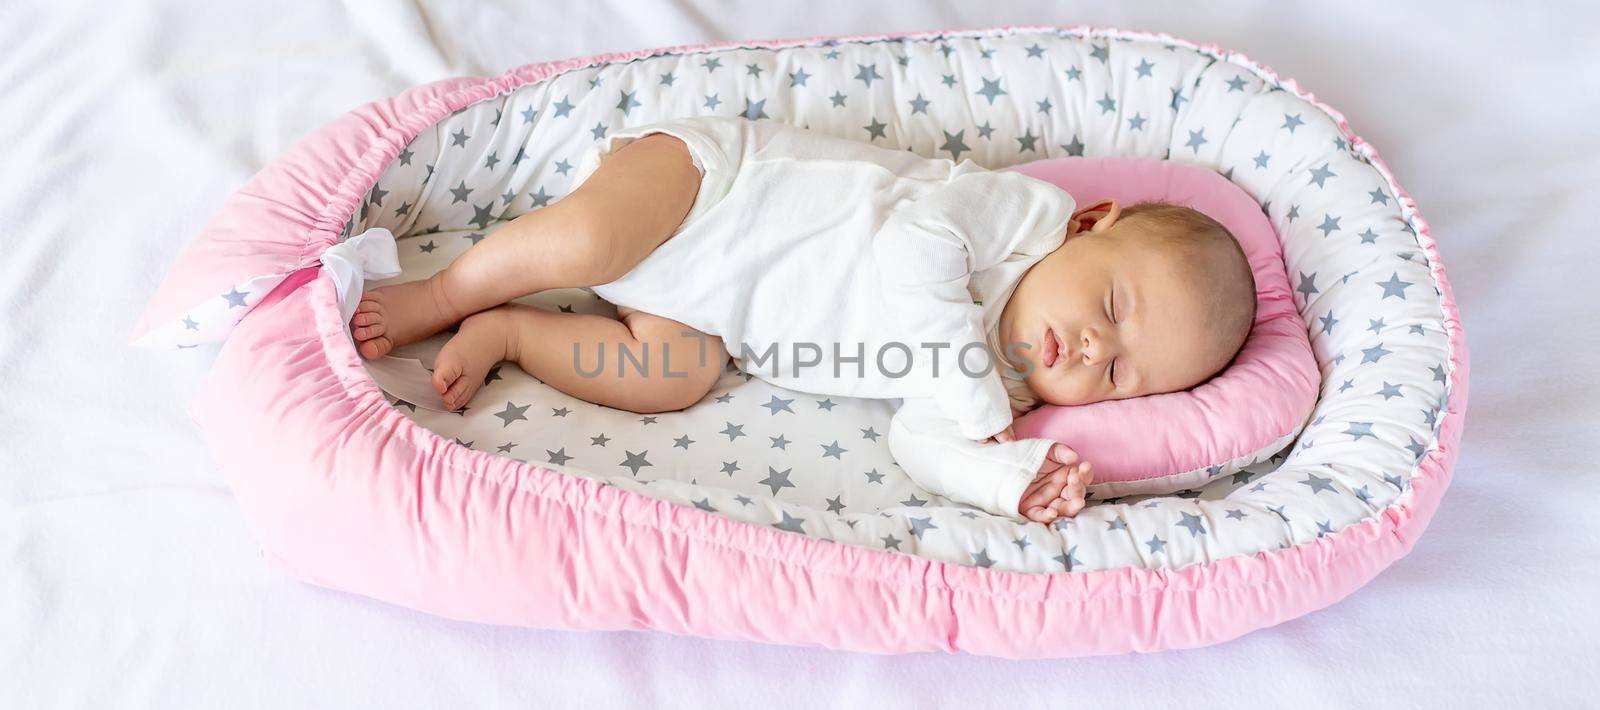 A newborn baby sleeps in a cocoon. Selective focus. People.